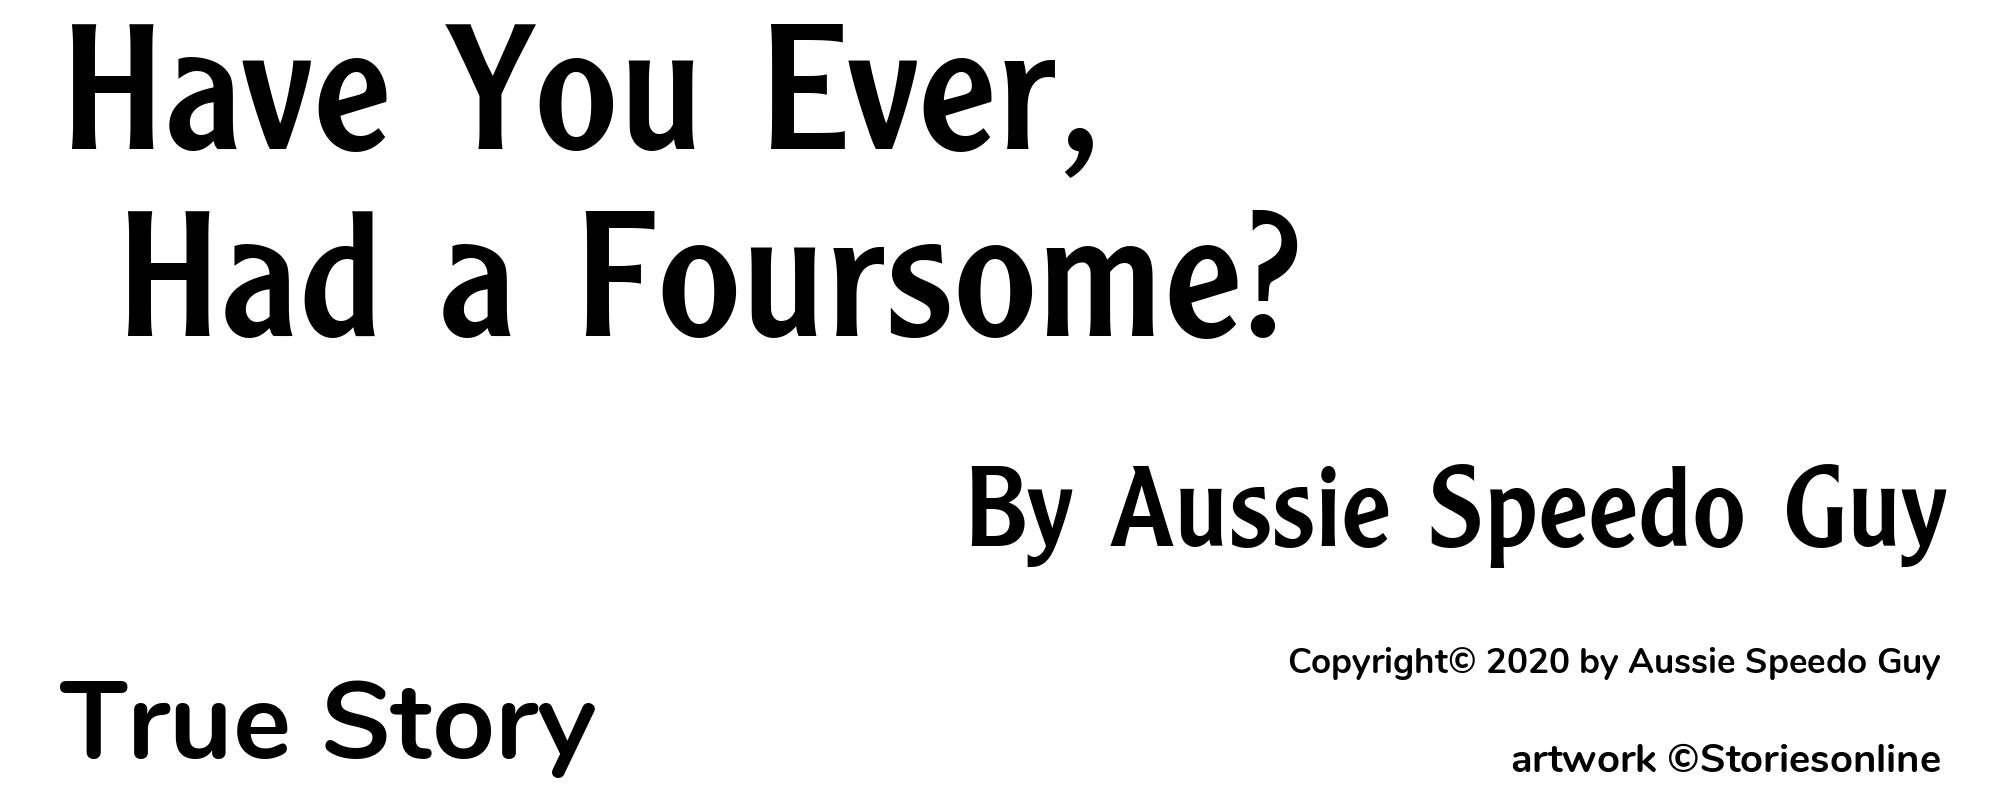 Have You Ever, Had a Foursome? - Cover